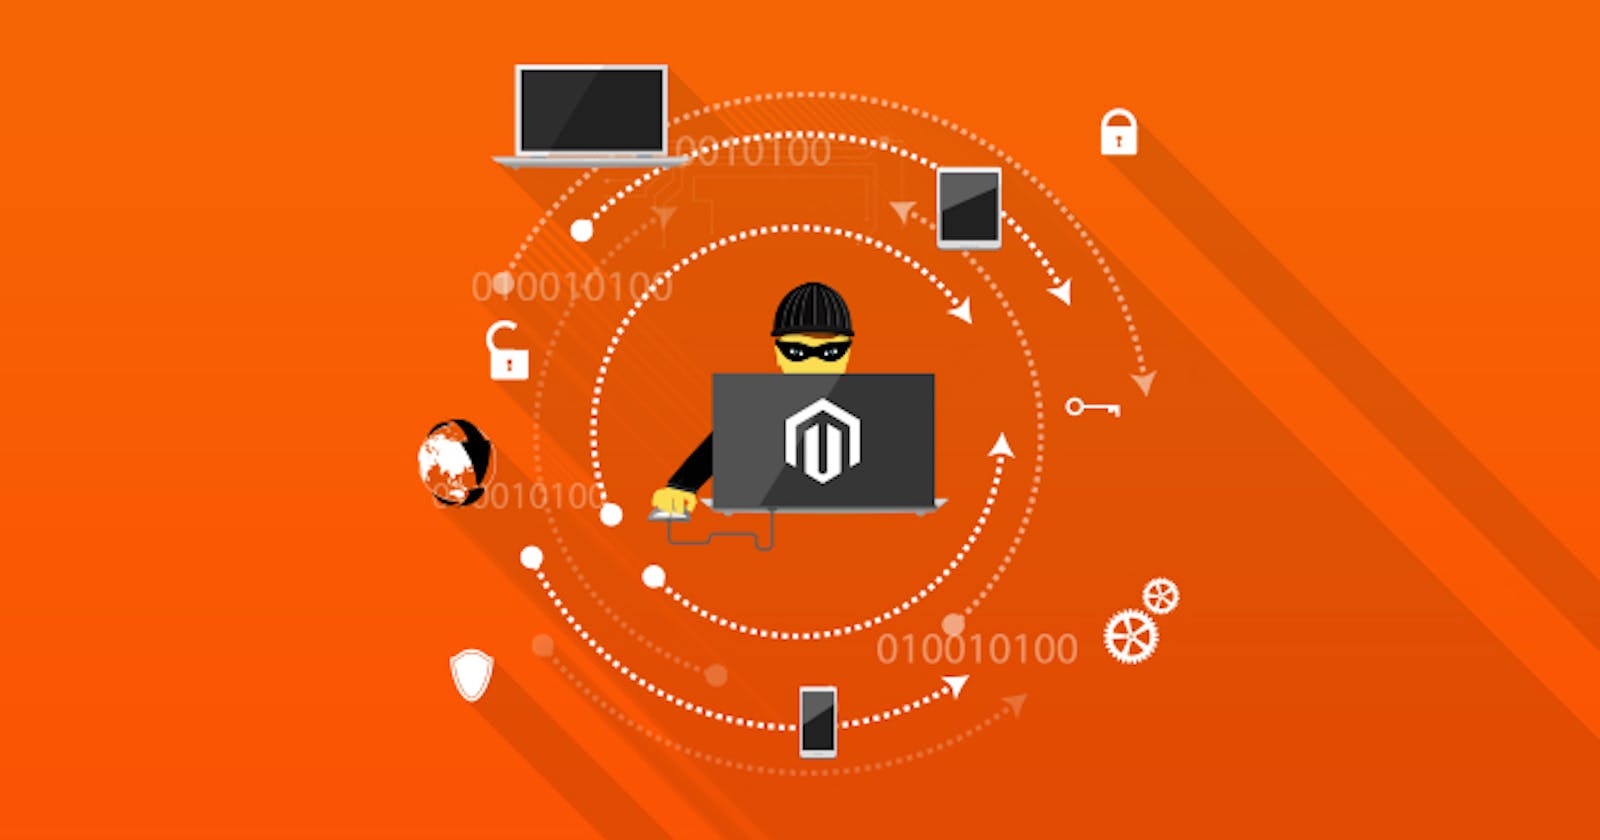 Recover Your Hacked Magento Store Without Any Issues